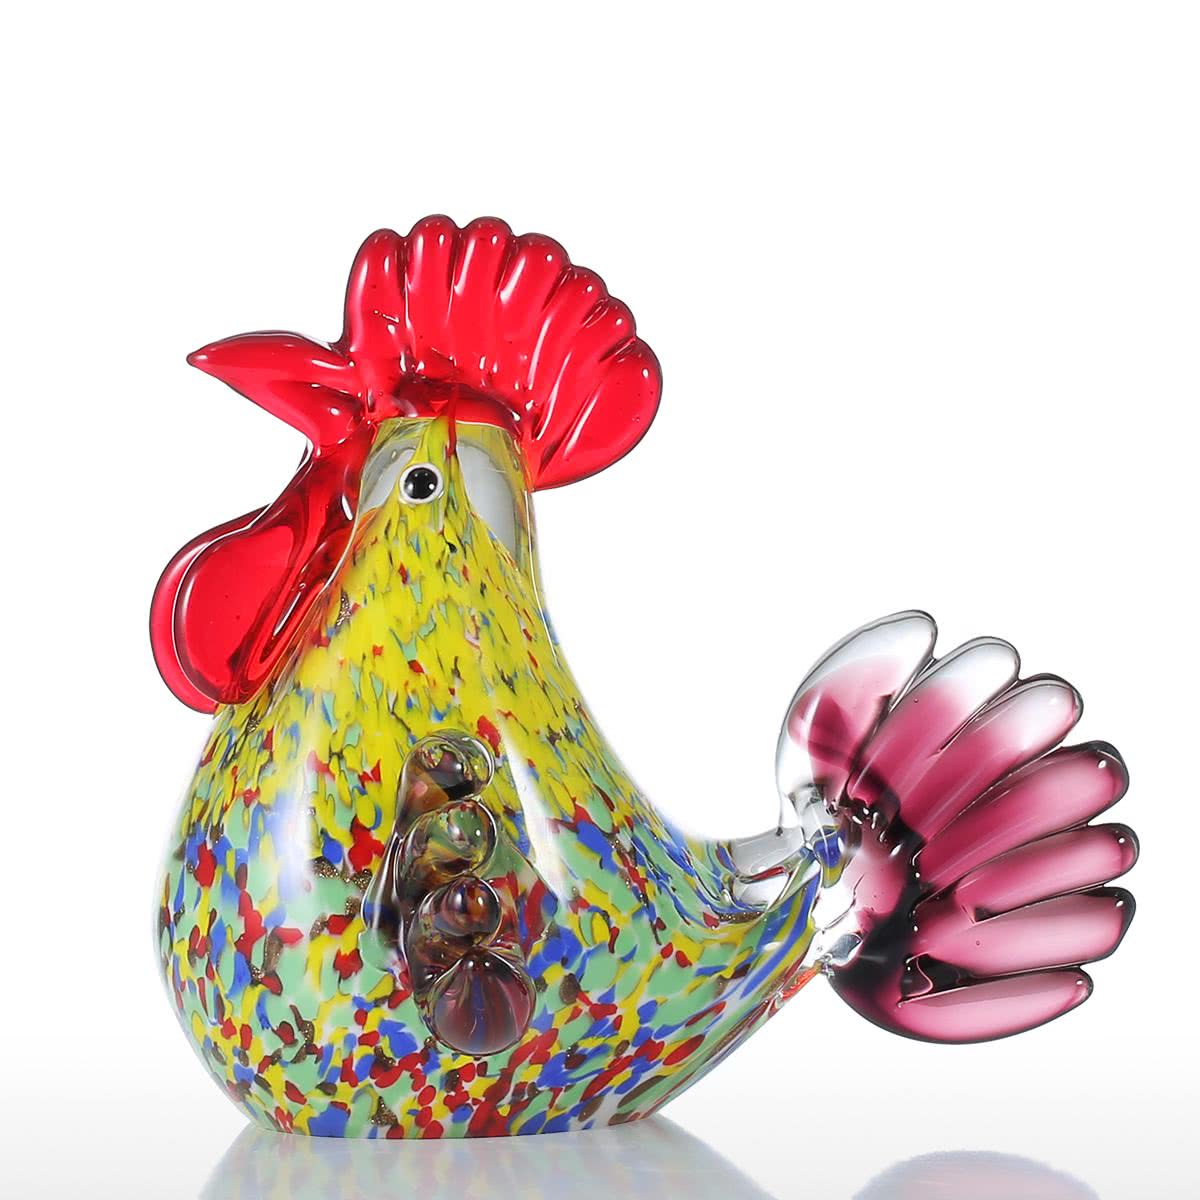 Rooster Decor or Chicken Decor with Glass Christmas Ornaments and Blown Glass Ornaments